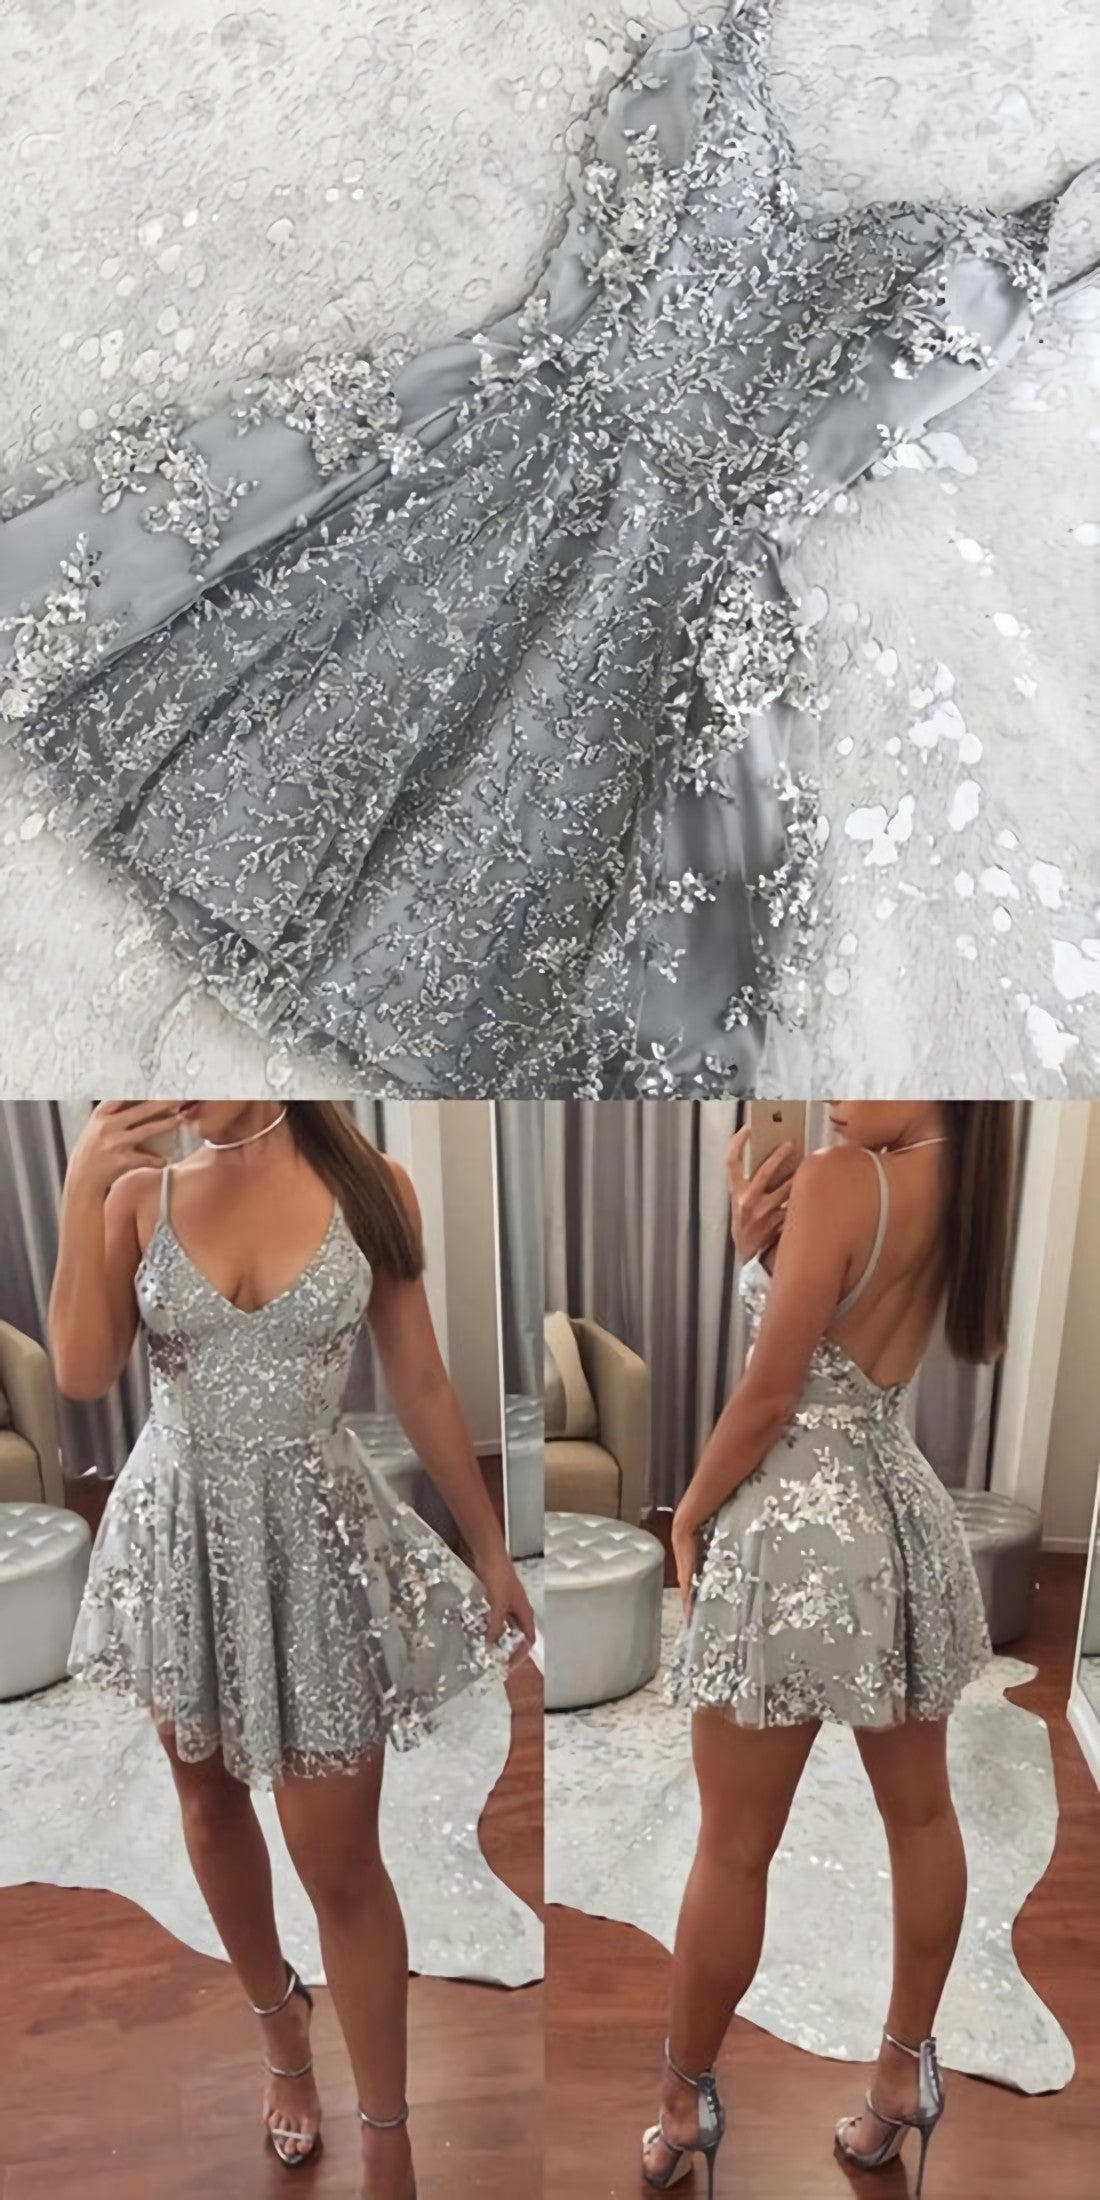 Charming Lace Prom Dress, Sexy Short Prom Dress, Spaghetti Straps Prom Gowns Homecoming Dress, Hot